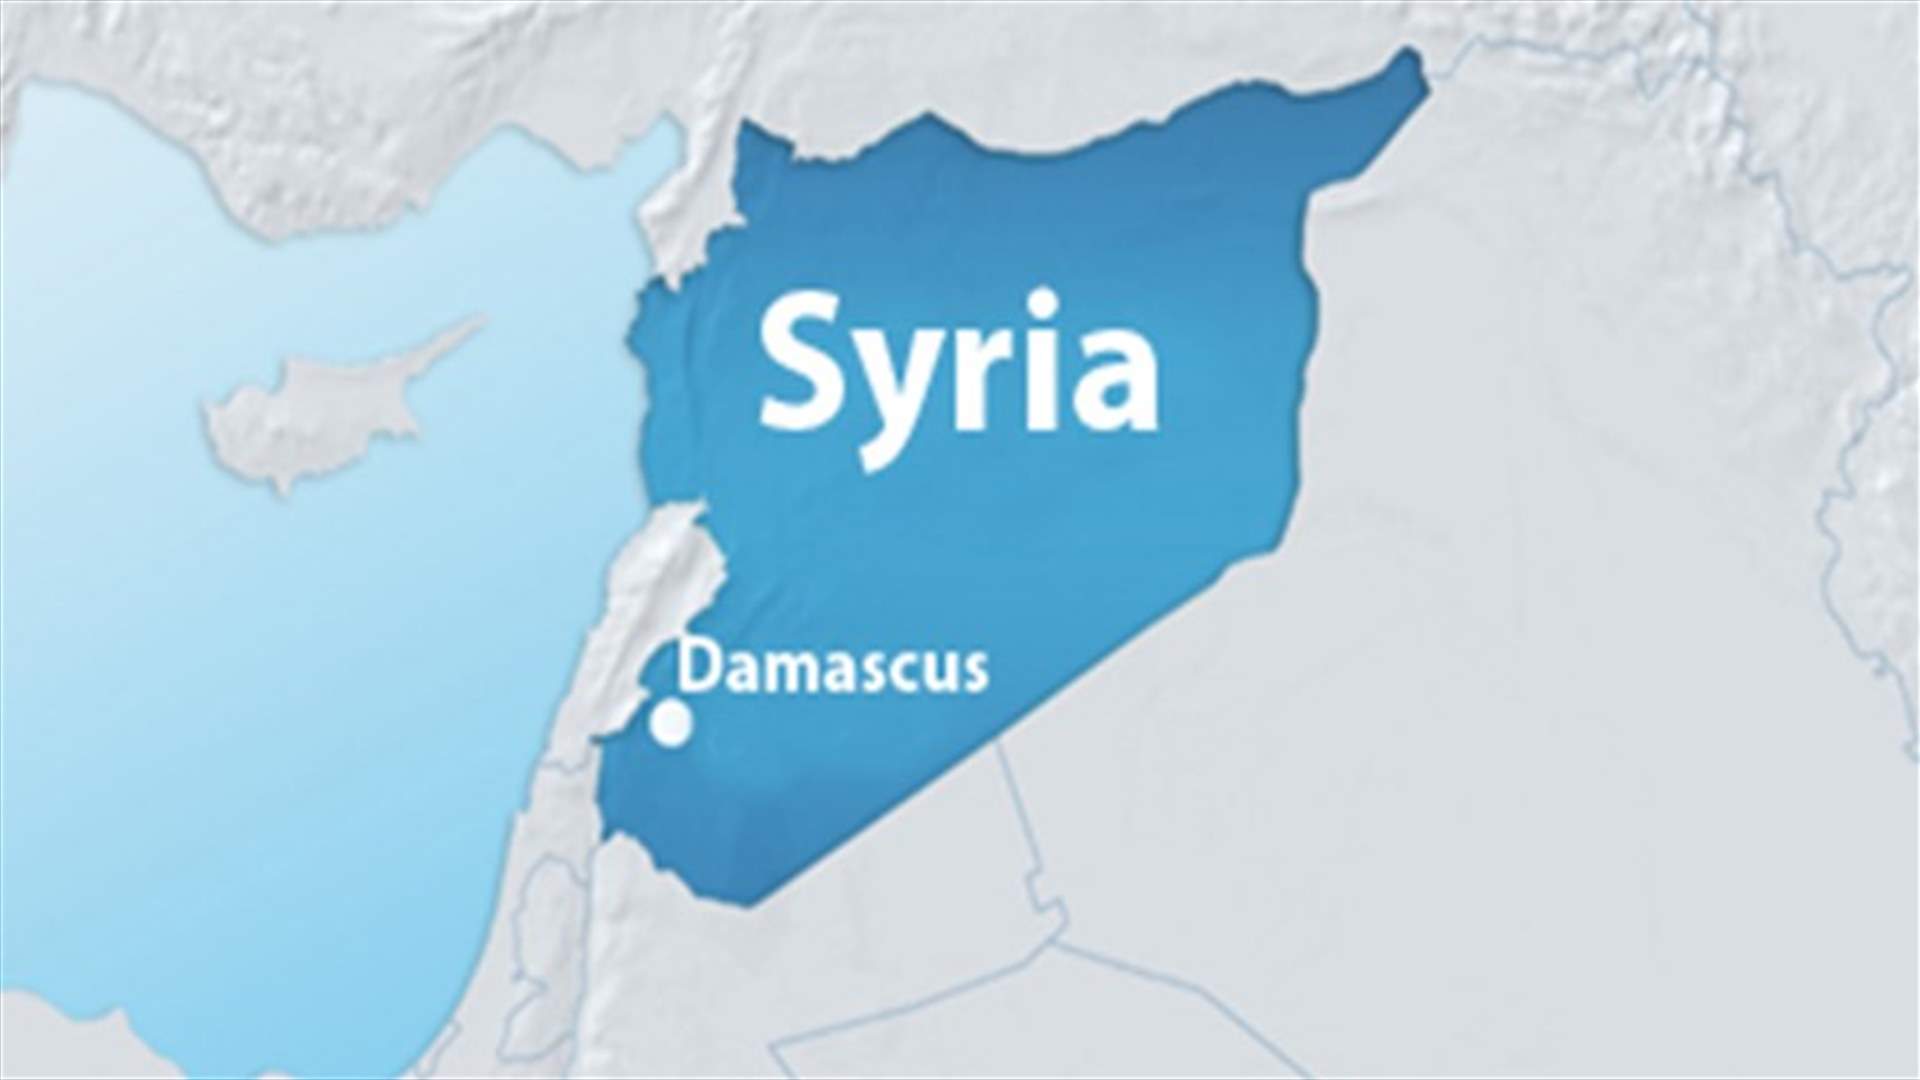 Syrian opposition insists Russia should end air strikes -Interfax